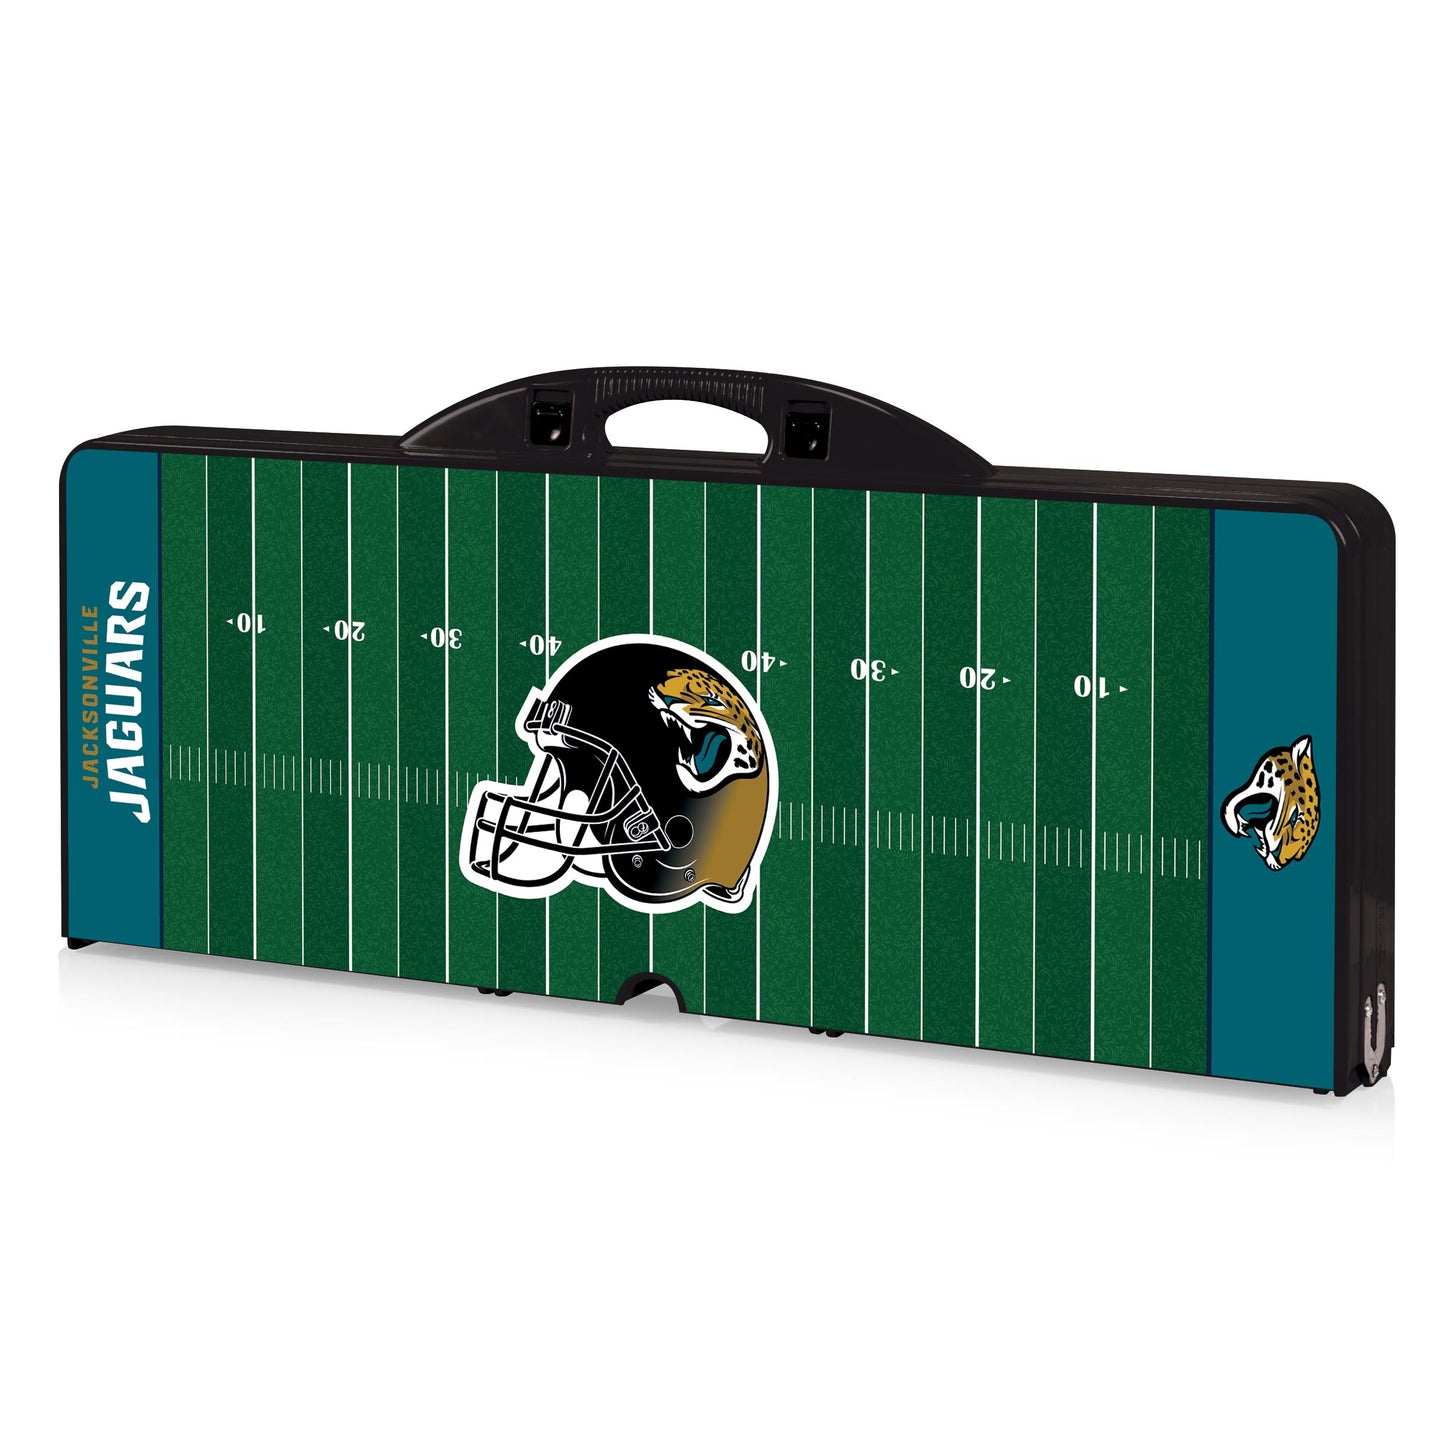 Jacksonville Jaguars - Picnic Table Portable Folding Table with Seats - Football Field Style